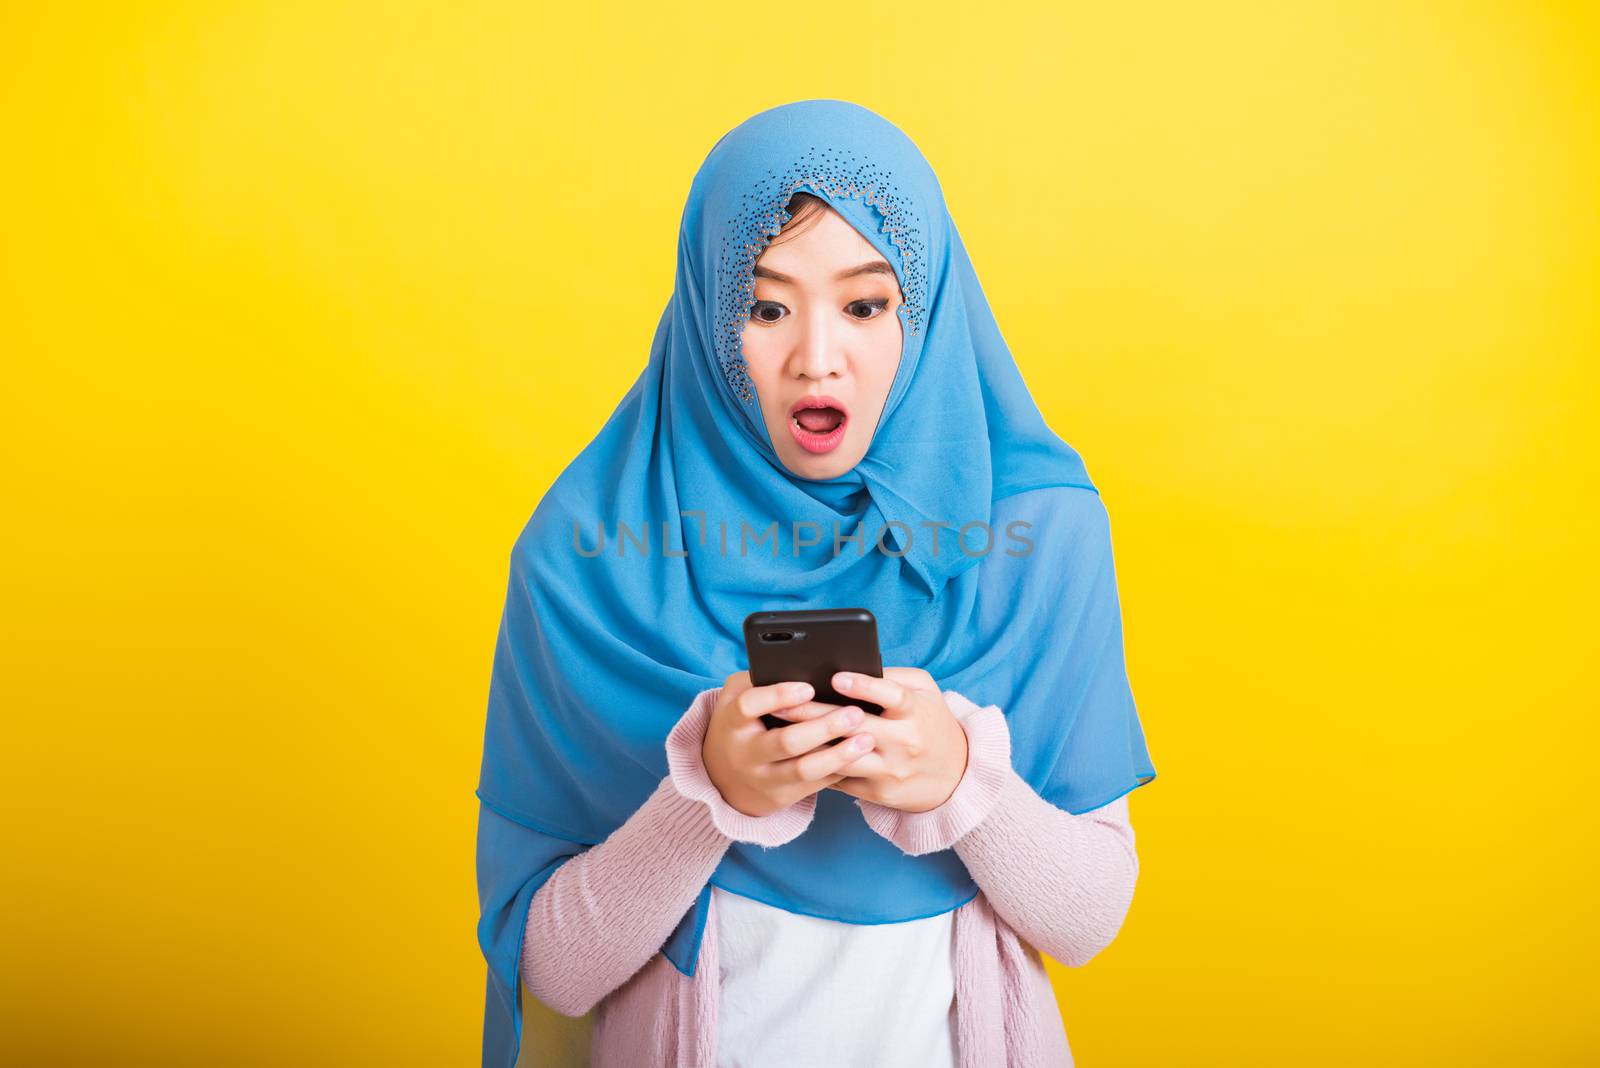 Asian Muslim Arab, Portrait of happy beautiful young woman Islam religious wear veil hijab funny smile she reads surprised confused shock news open mouth, studio shot isolated on yellow background